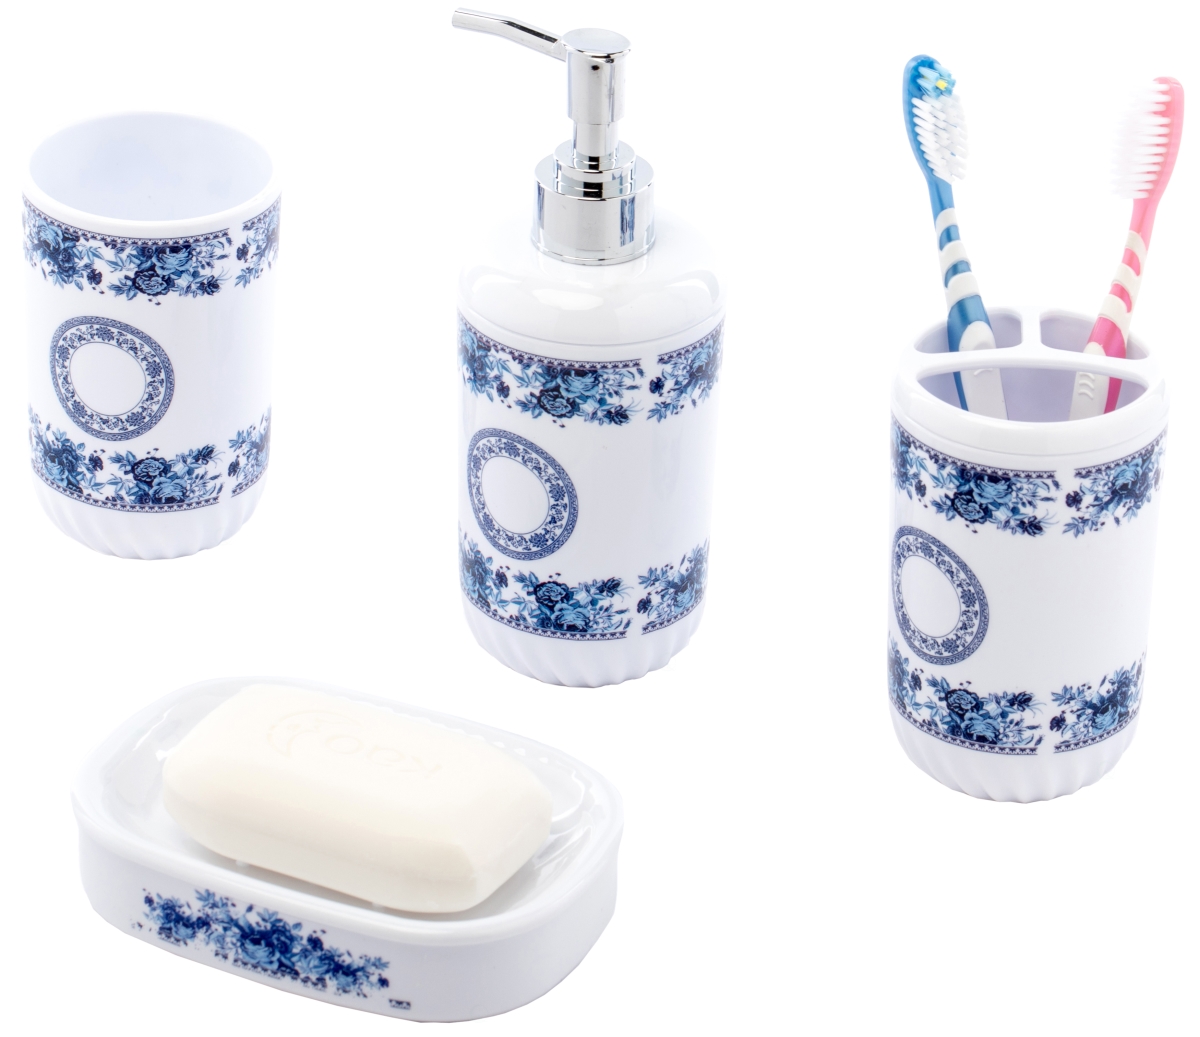 Picture of Basicwise QI003263.WT 5.5 x 0.71 x 6.5 in. Bathroom Accessory Set, White - Soap Dispenser - Toothbrush Holder -Tumbler - Soap Dish - 4 Piece